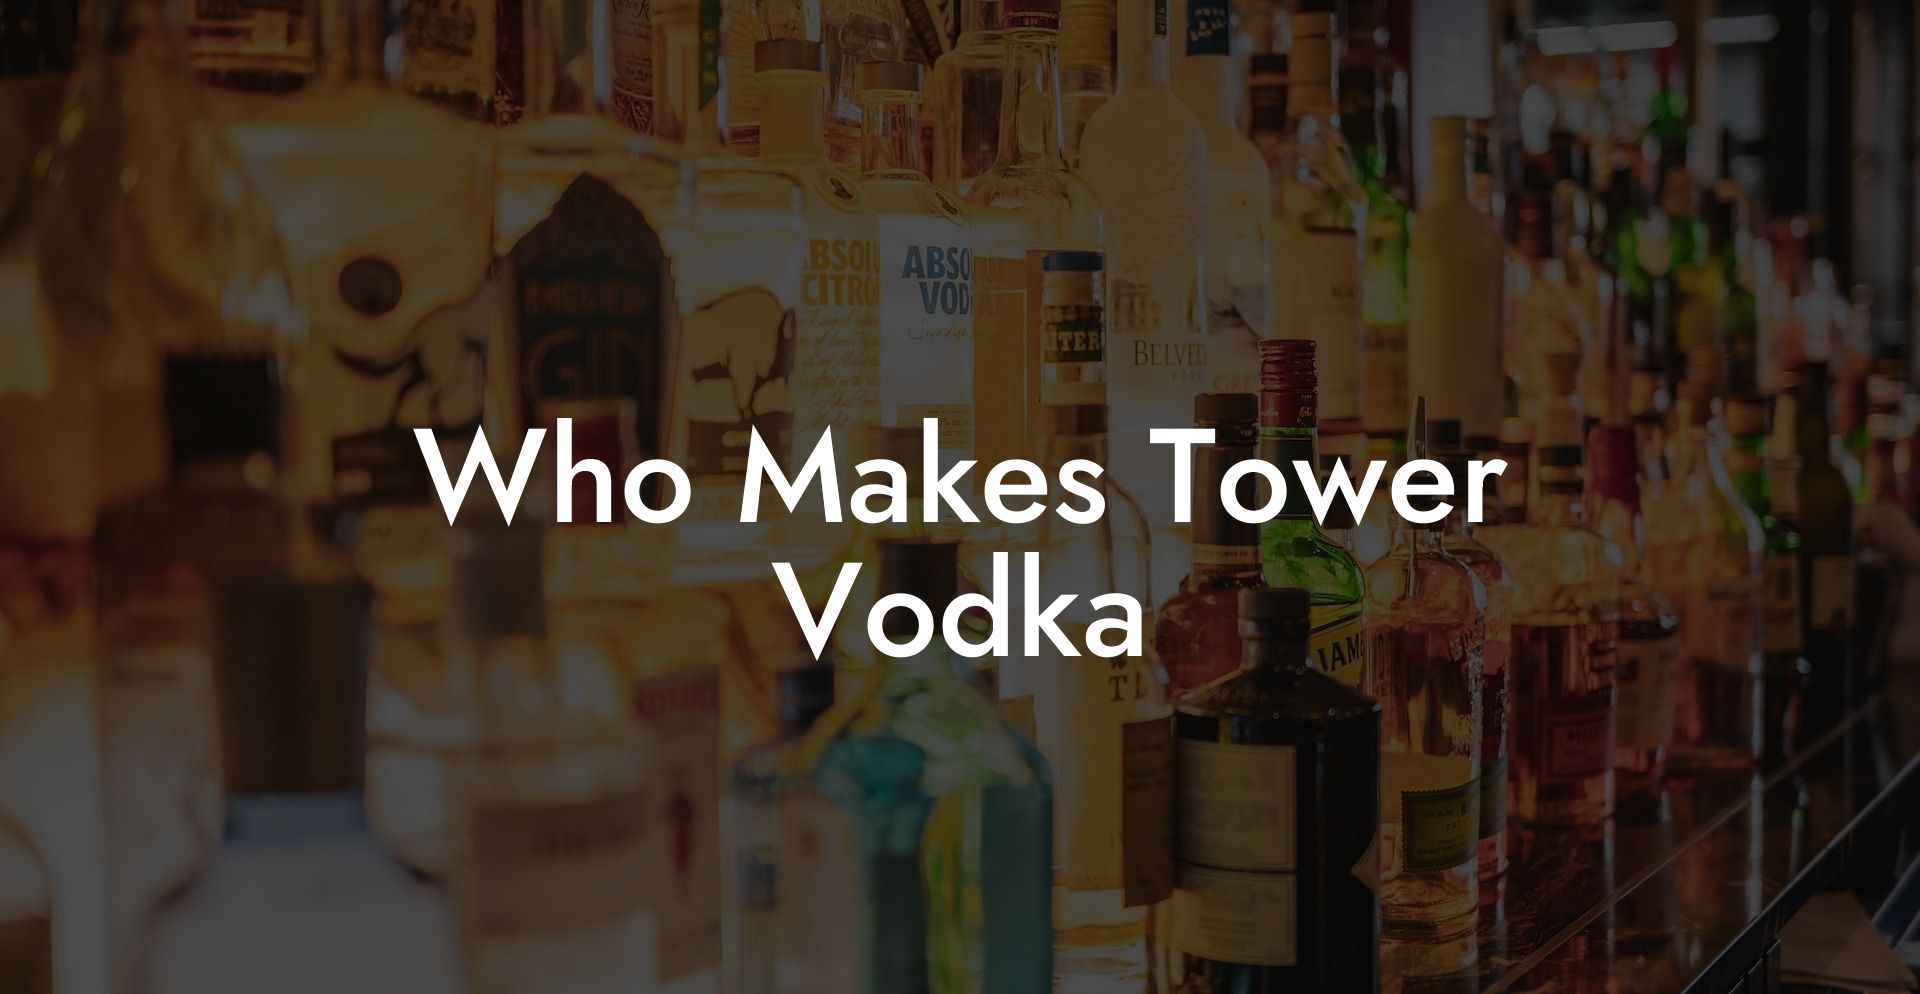 Who Makes Tower Vodka